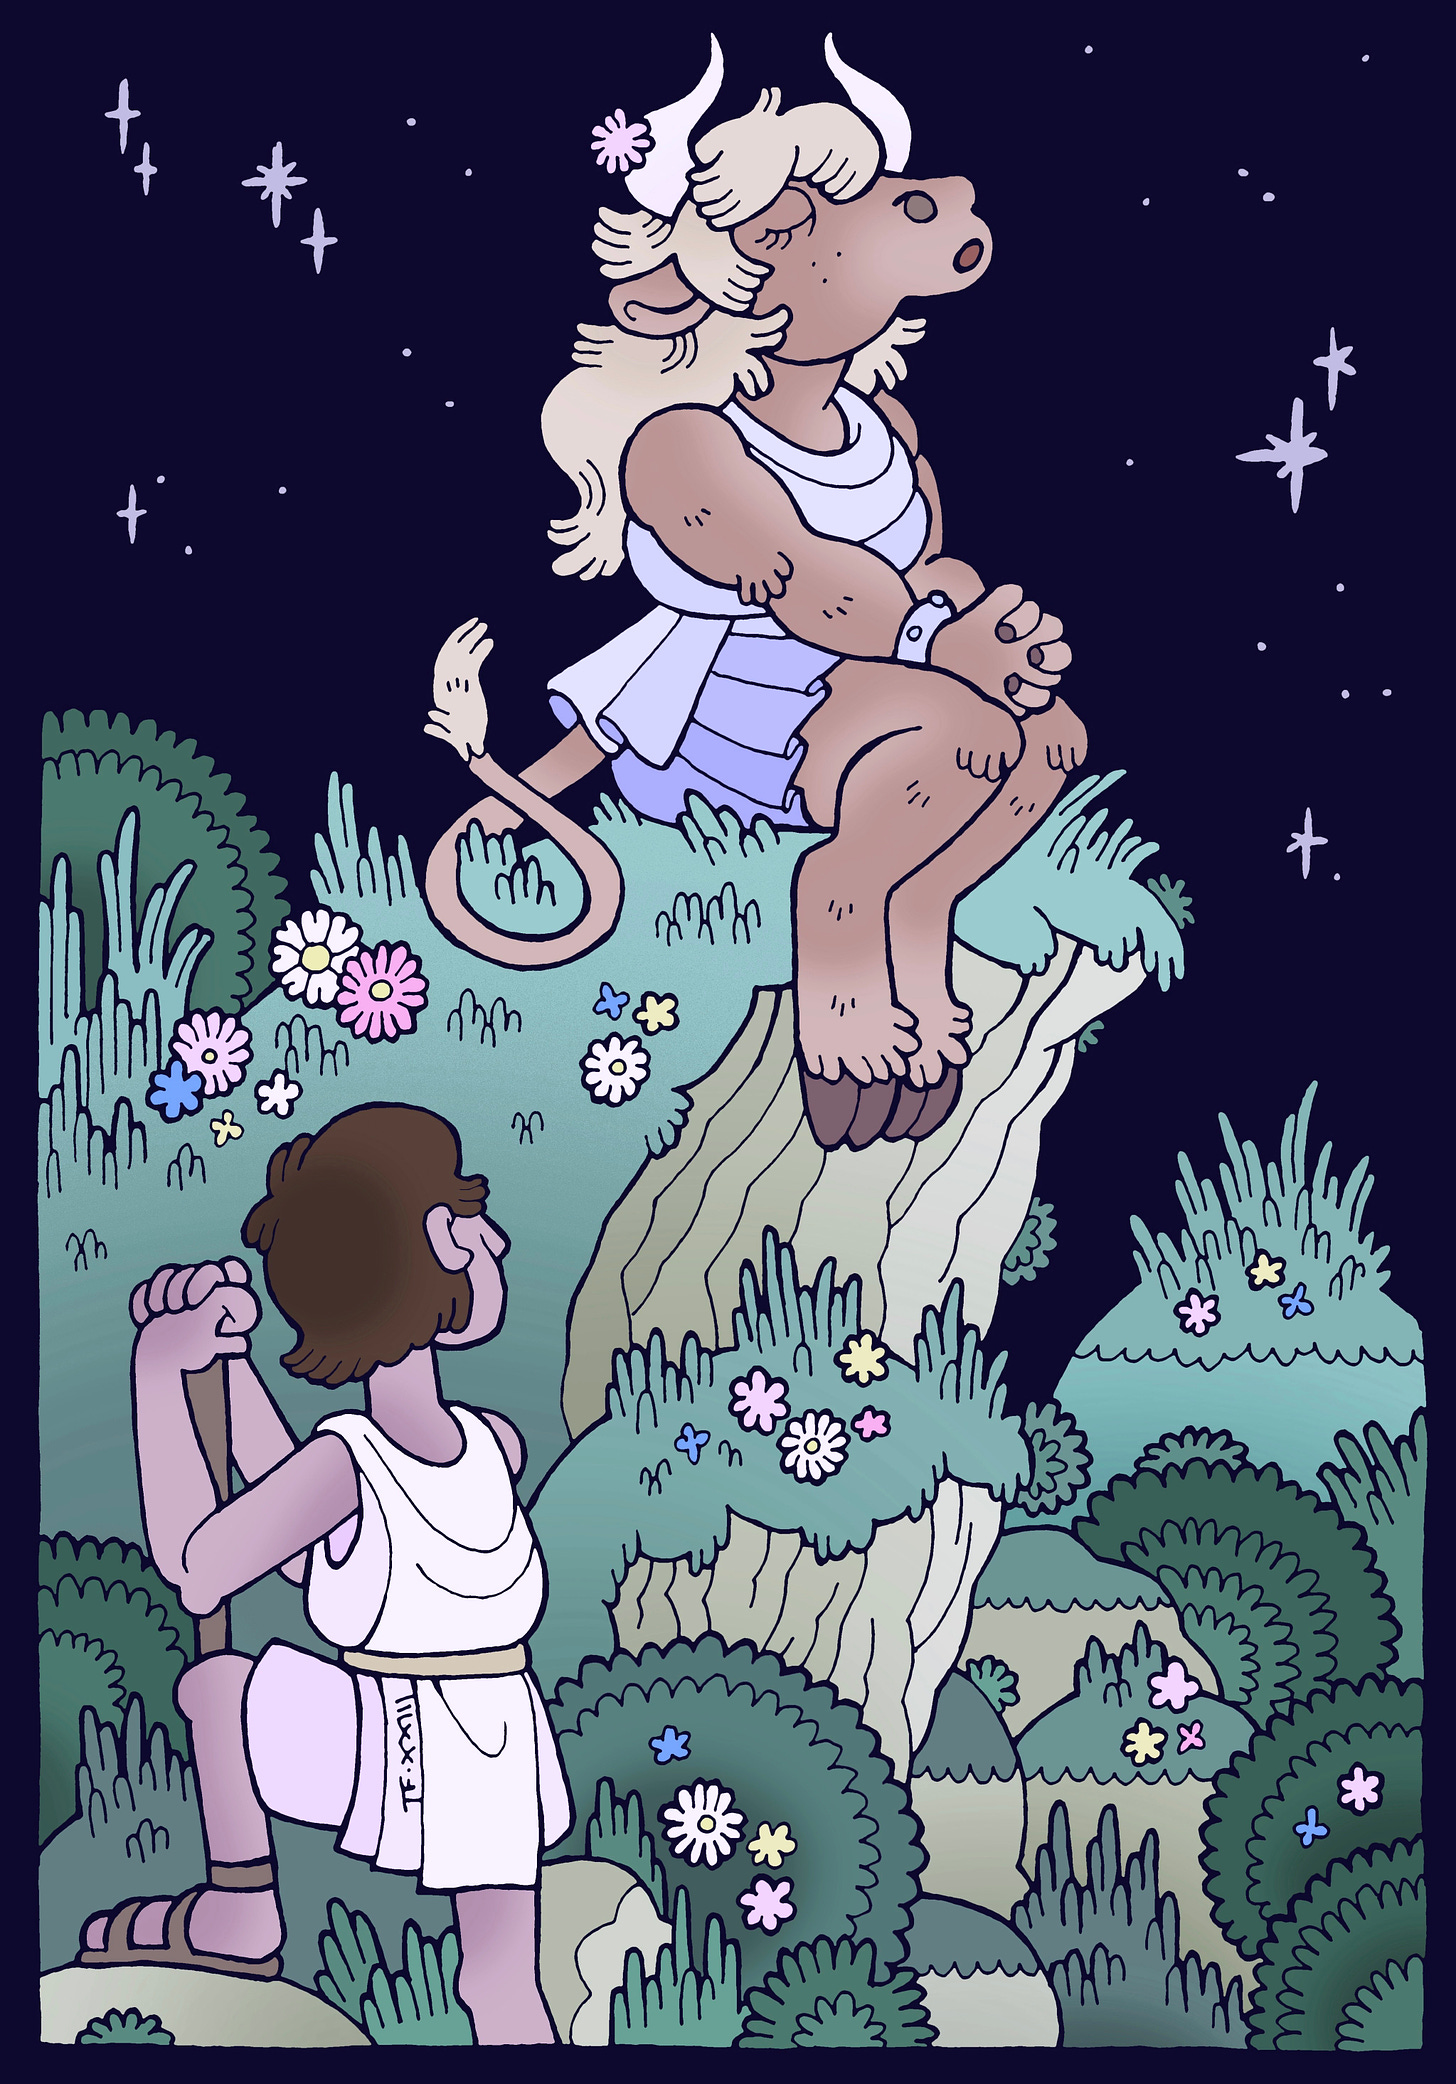 Traditionally hand drawn and digitally coloured illustration. A young human farm boy stops to listen to a young minotaur girl, who is sitting atop a hill and singing. Around them is tall grass and many flowering bushes. In the night sky, several stars twinkle.